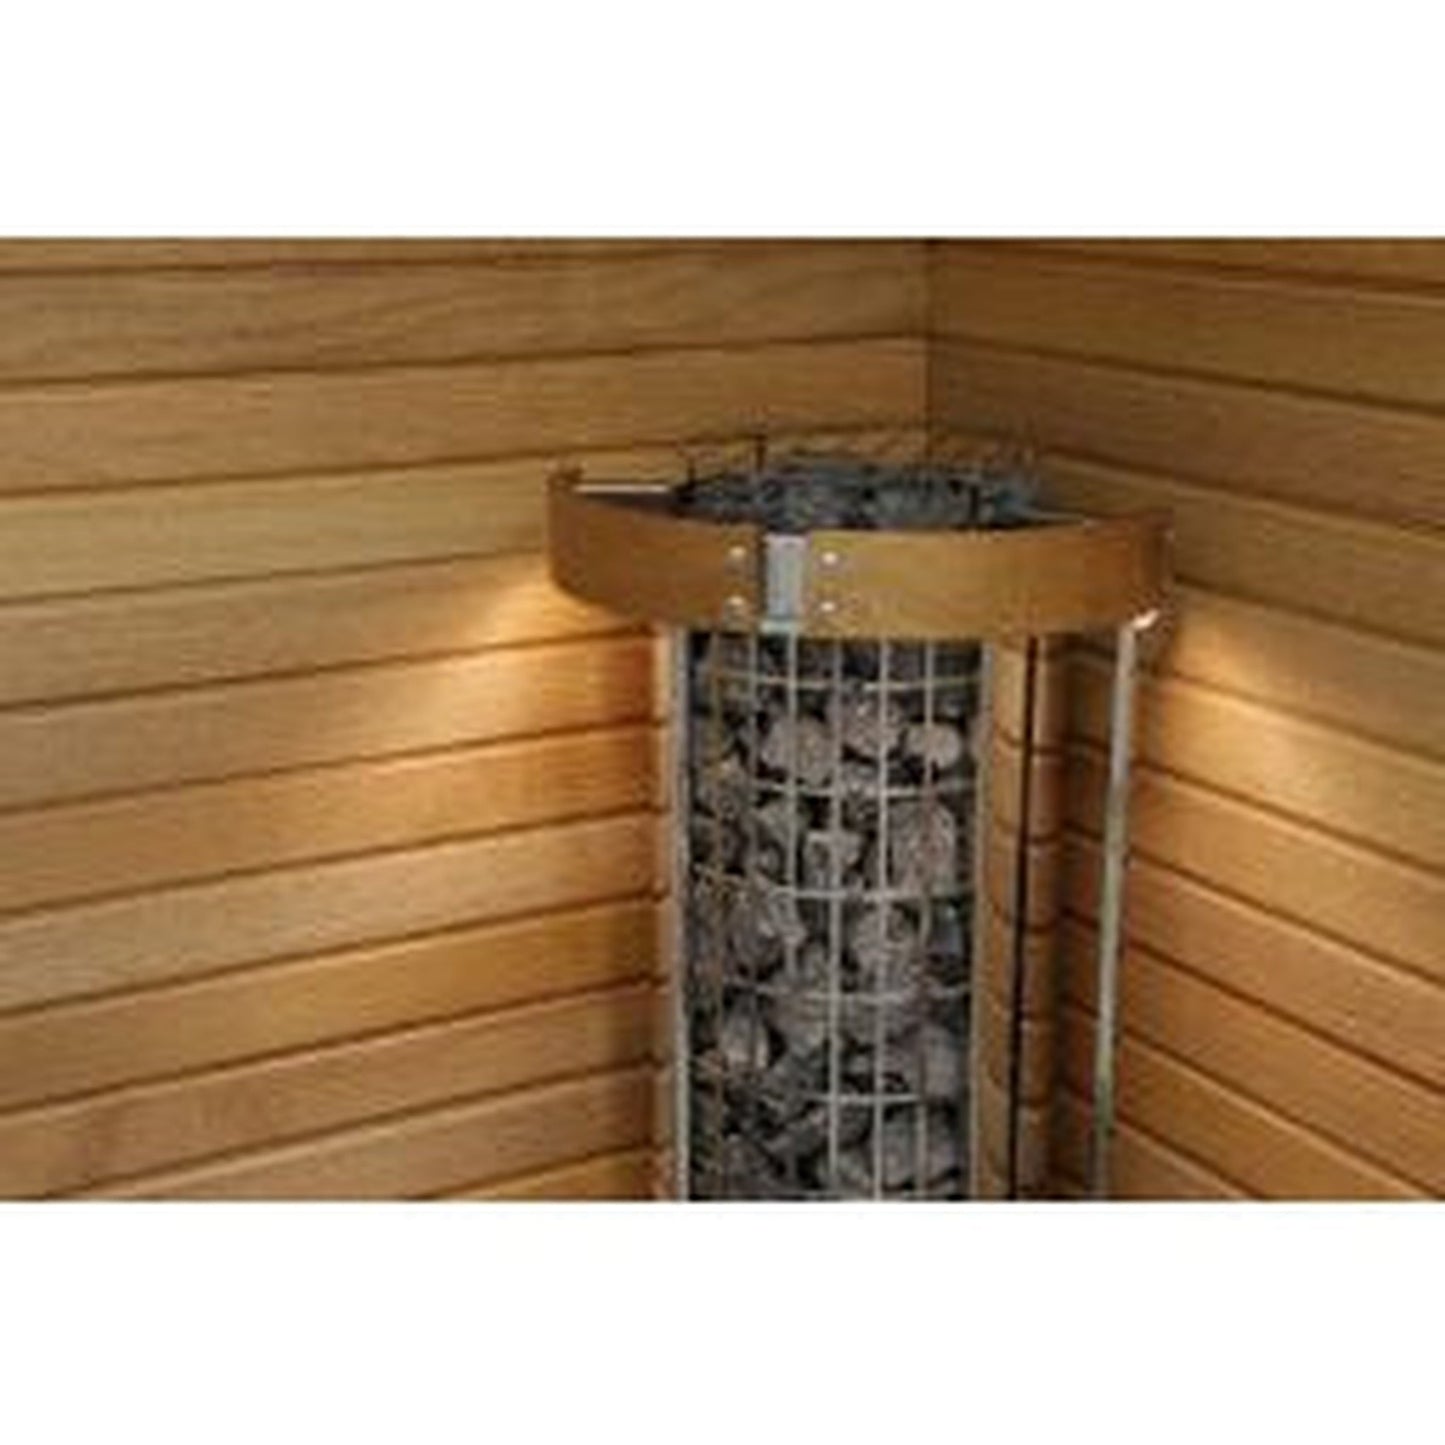 Harvia Cilindro Half Series 6 kW 240V 1PH Freestanding Stainless Steel Electric Sauna Heater With Built-In Timer and Temperature Control